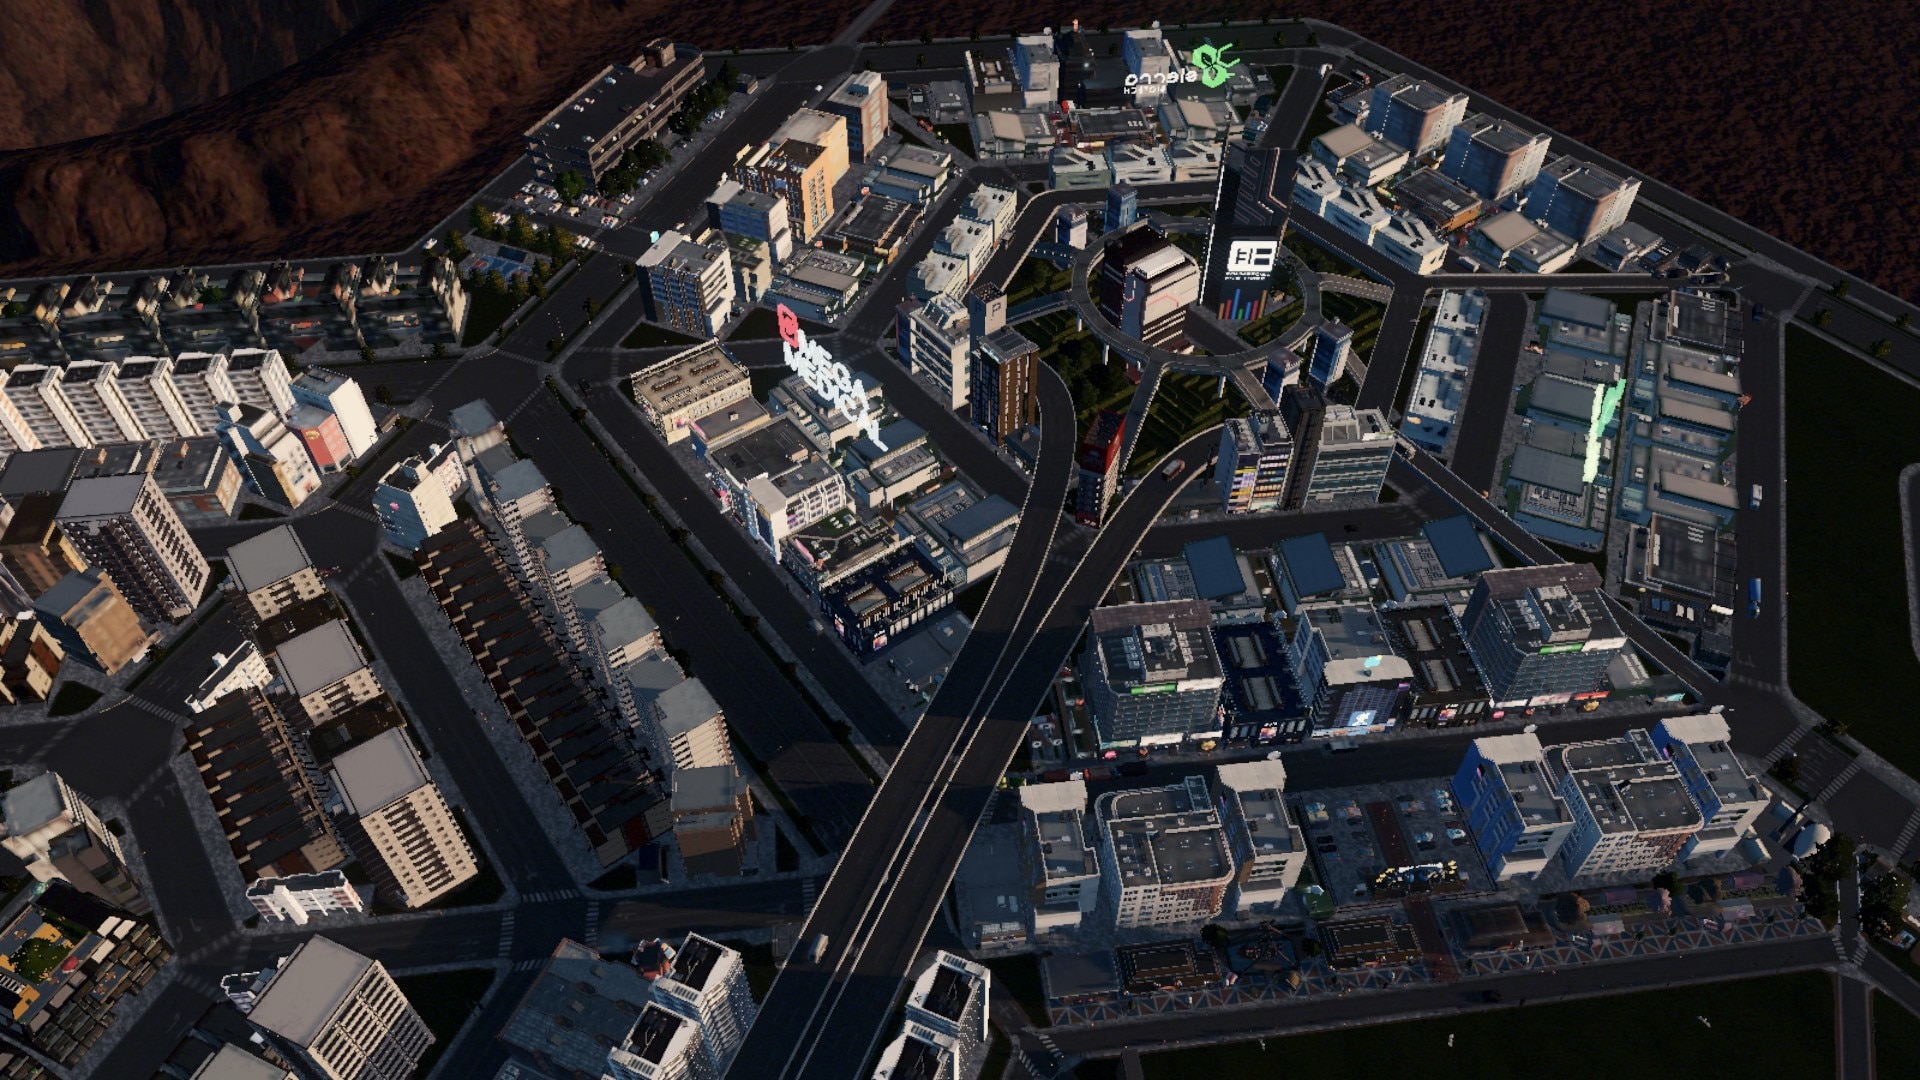 Hundreds of Cims ditching cars around city - Cities: Skylines